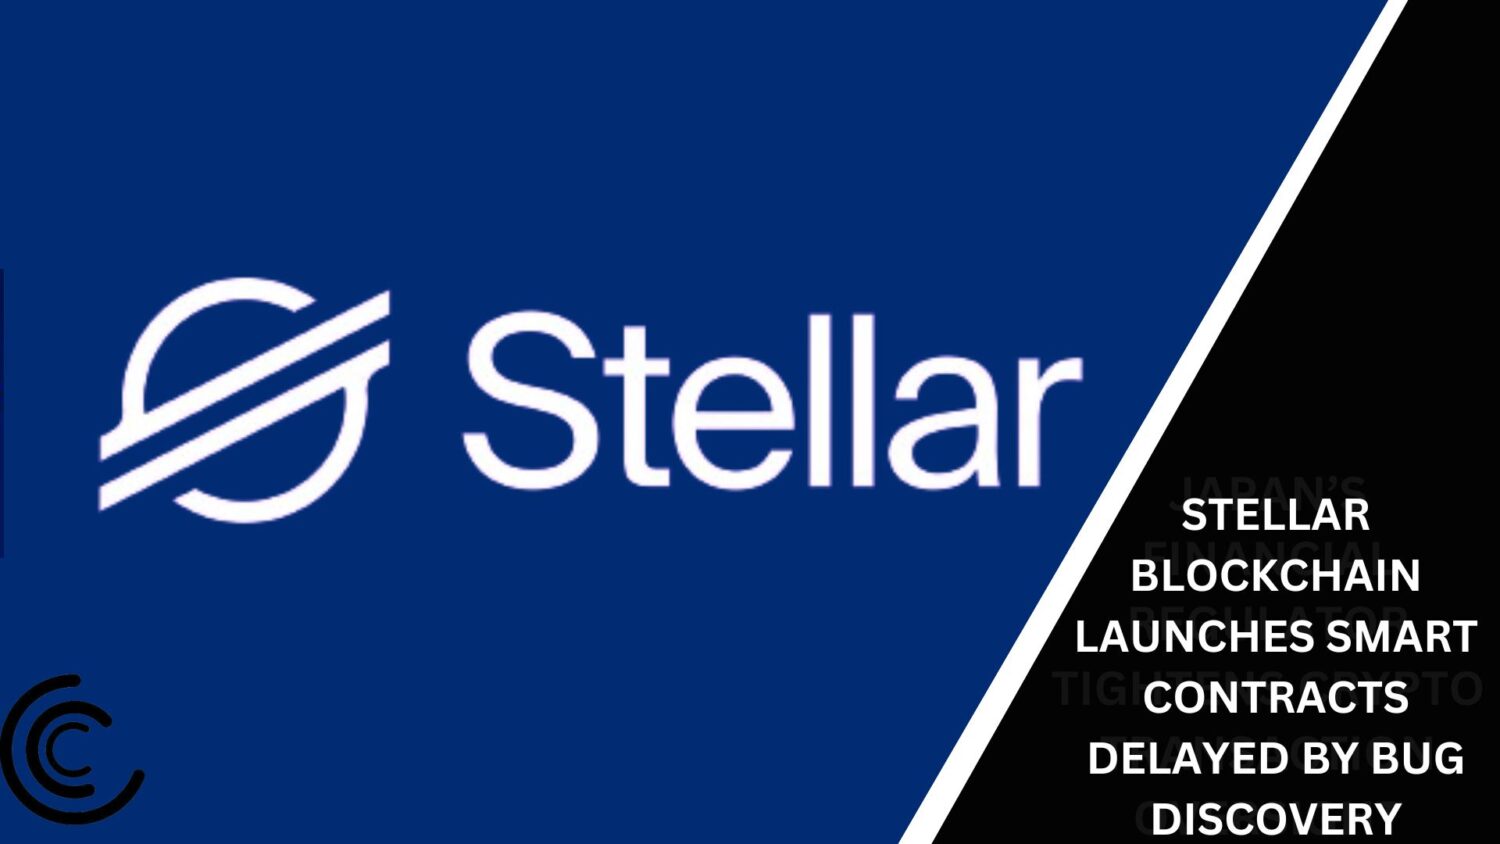 Stellar Blockchain Launches Smart Contracts Delayed By Bug Discovery